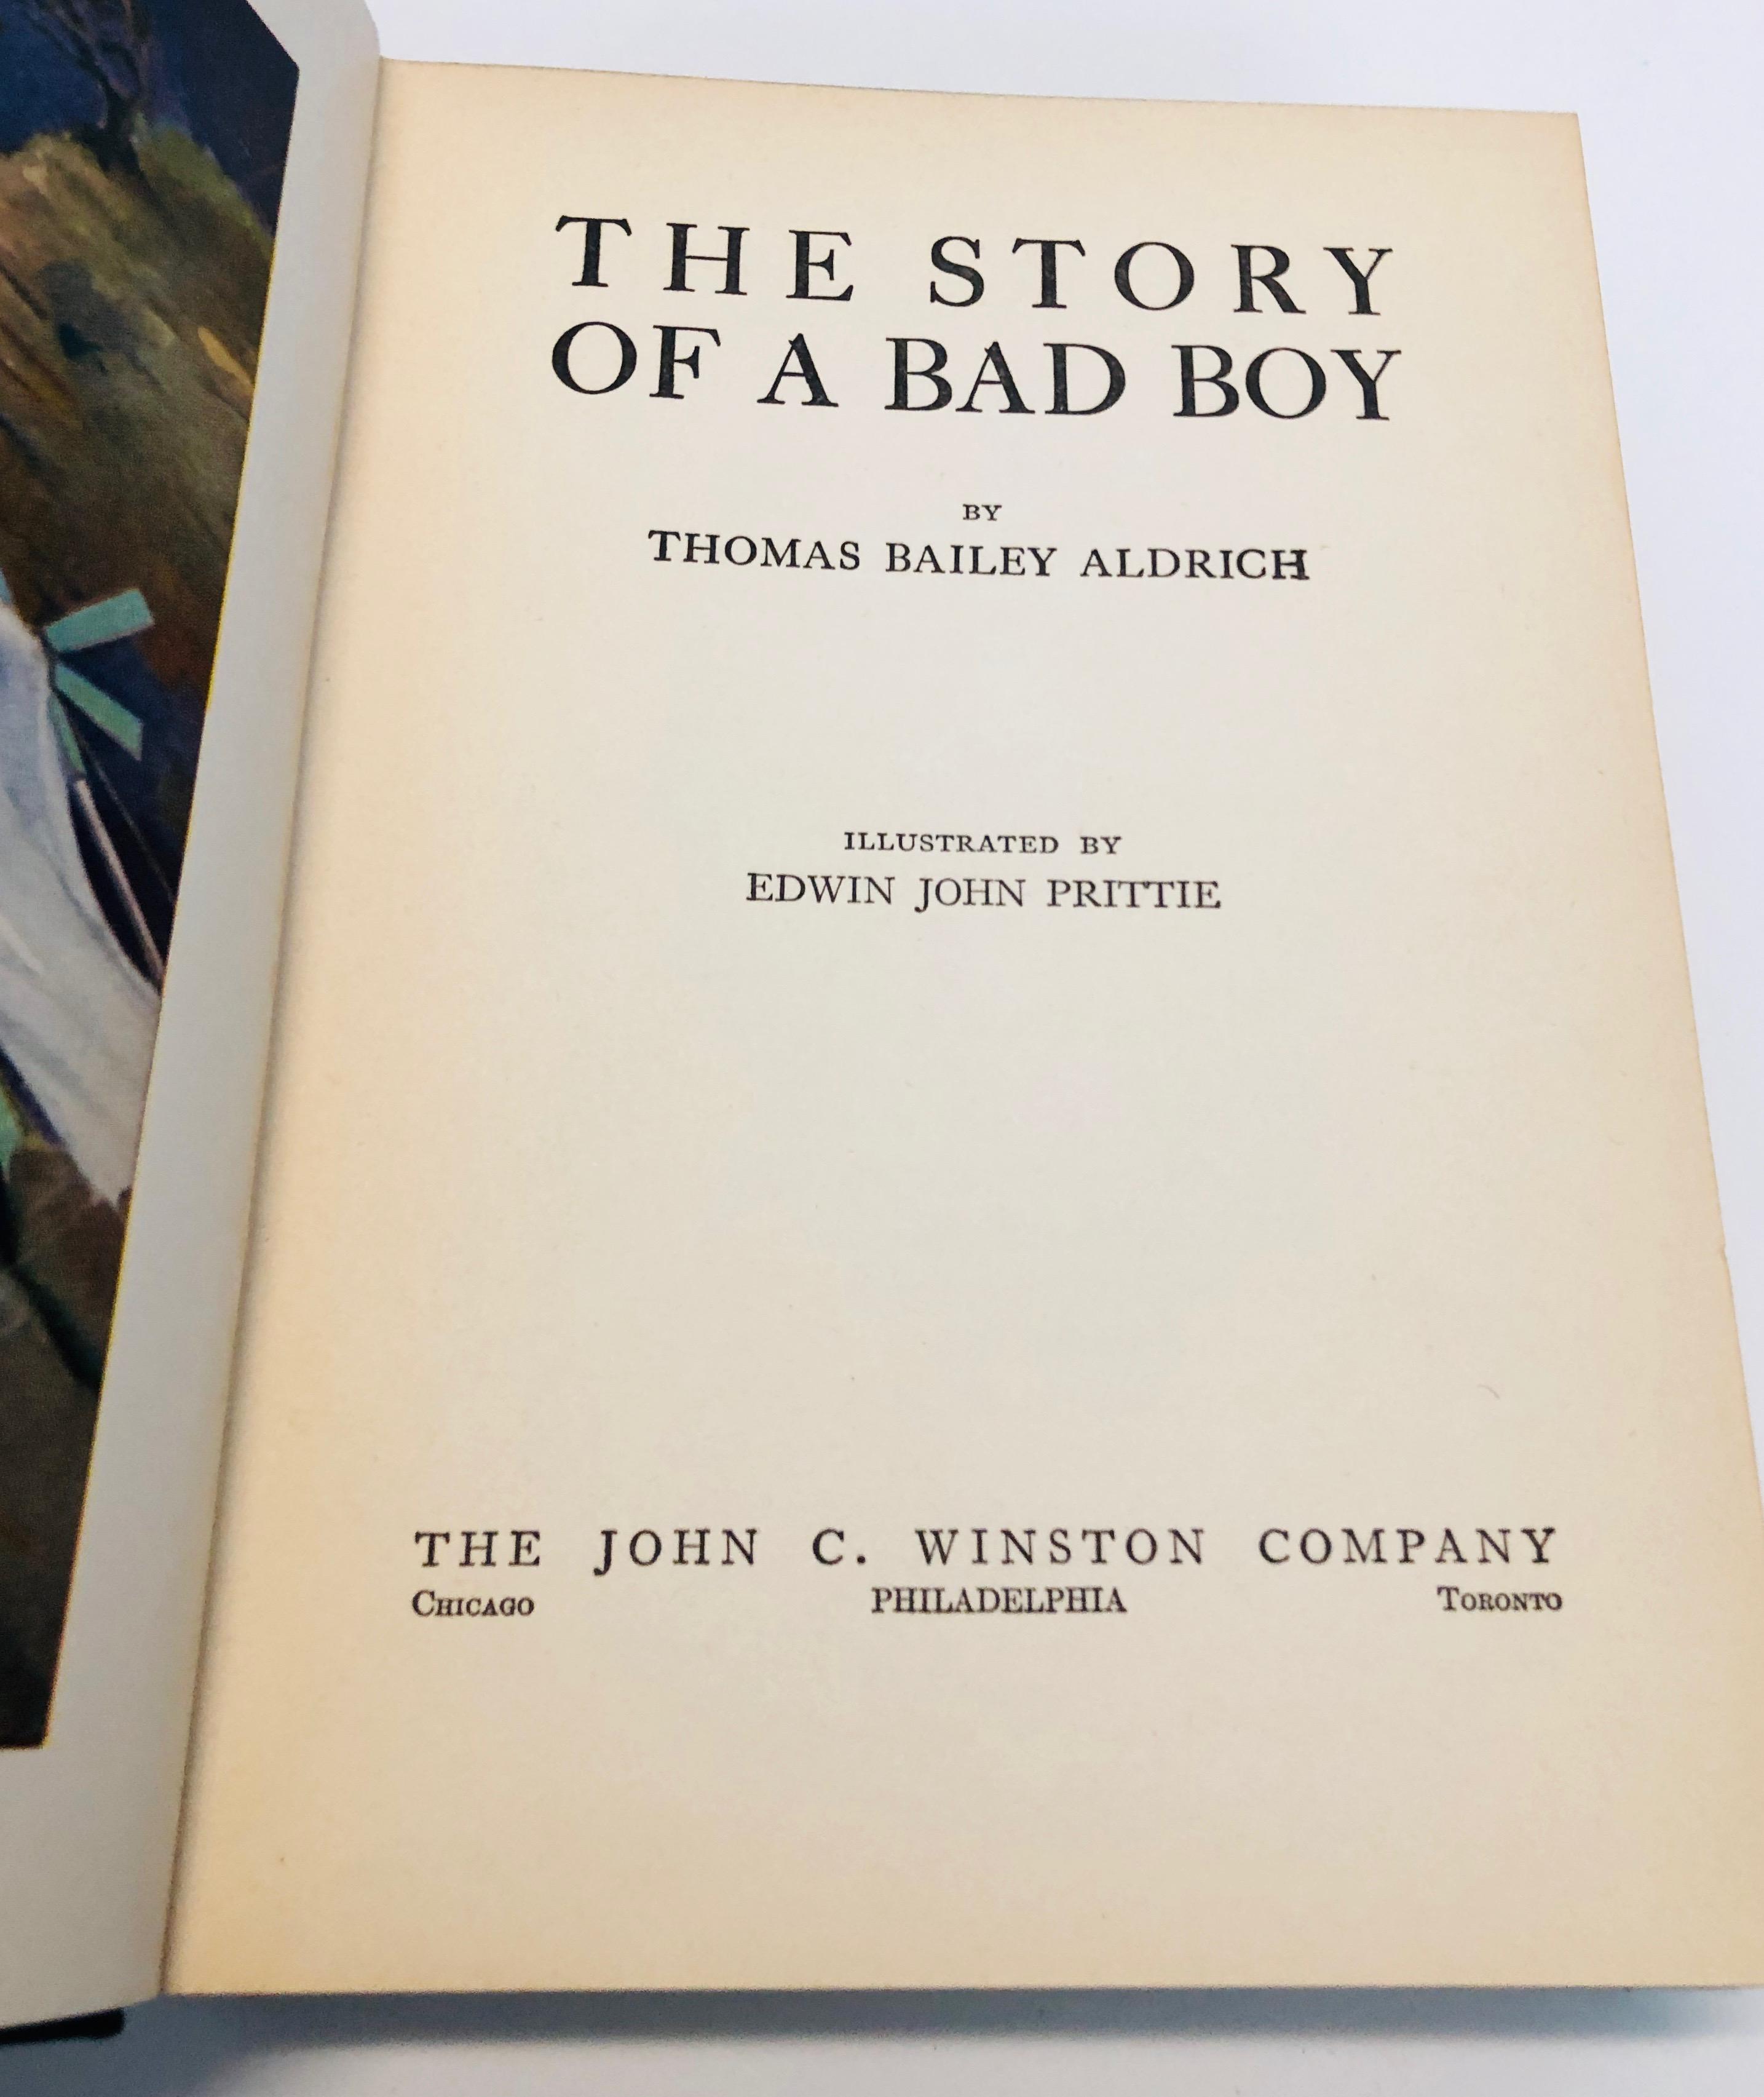 The Story of a Bad Boy by Thomas Bailey Aldrich (1927)